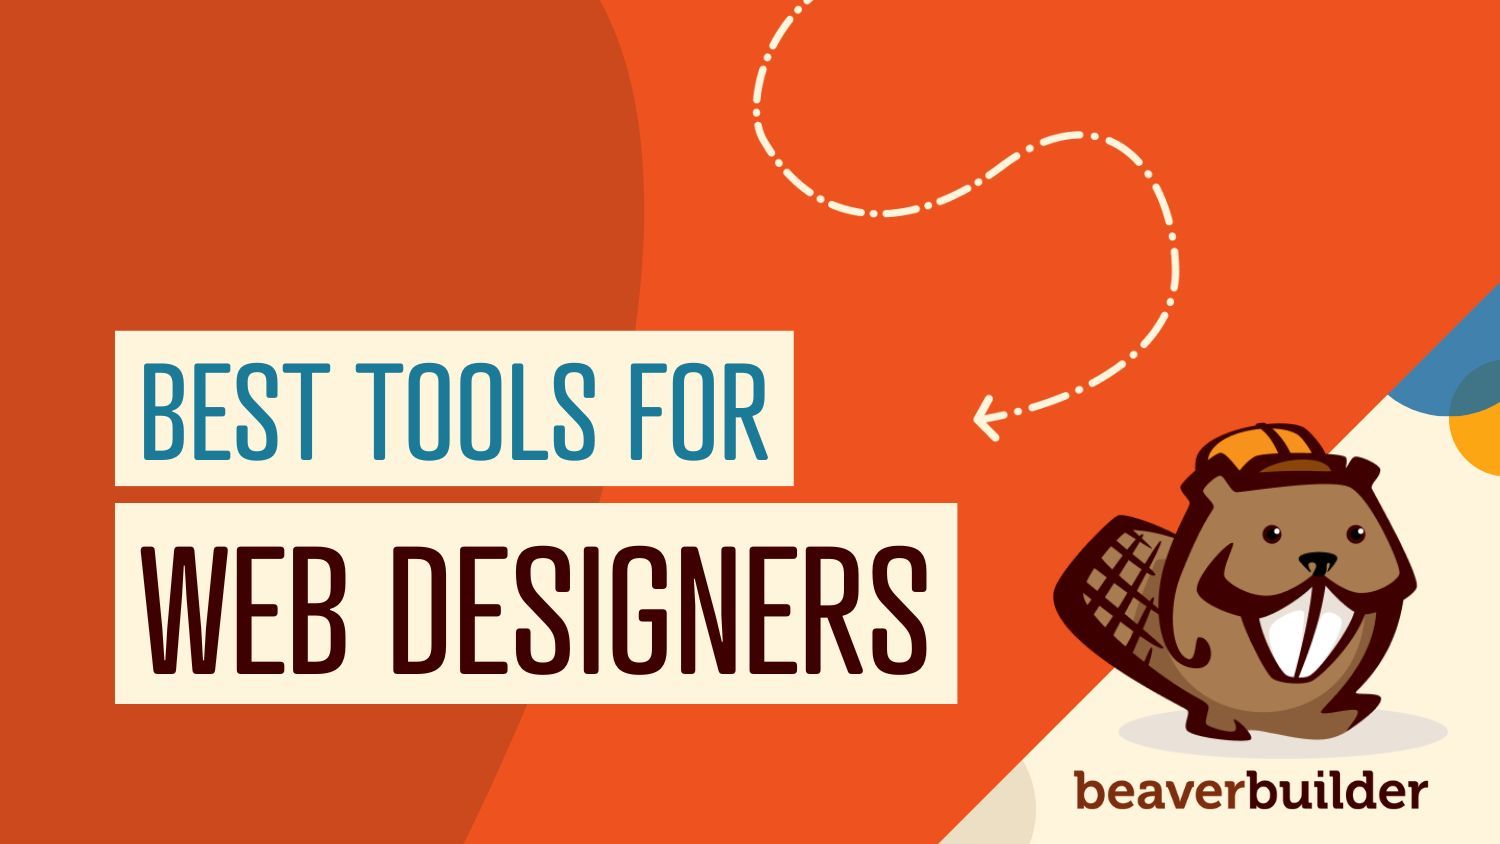 Best tools for web designers.